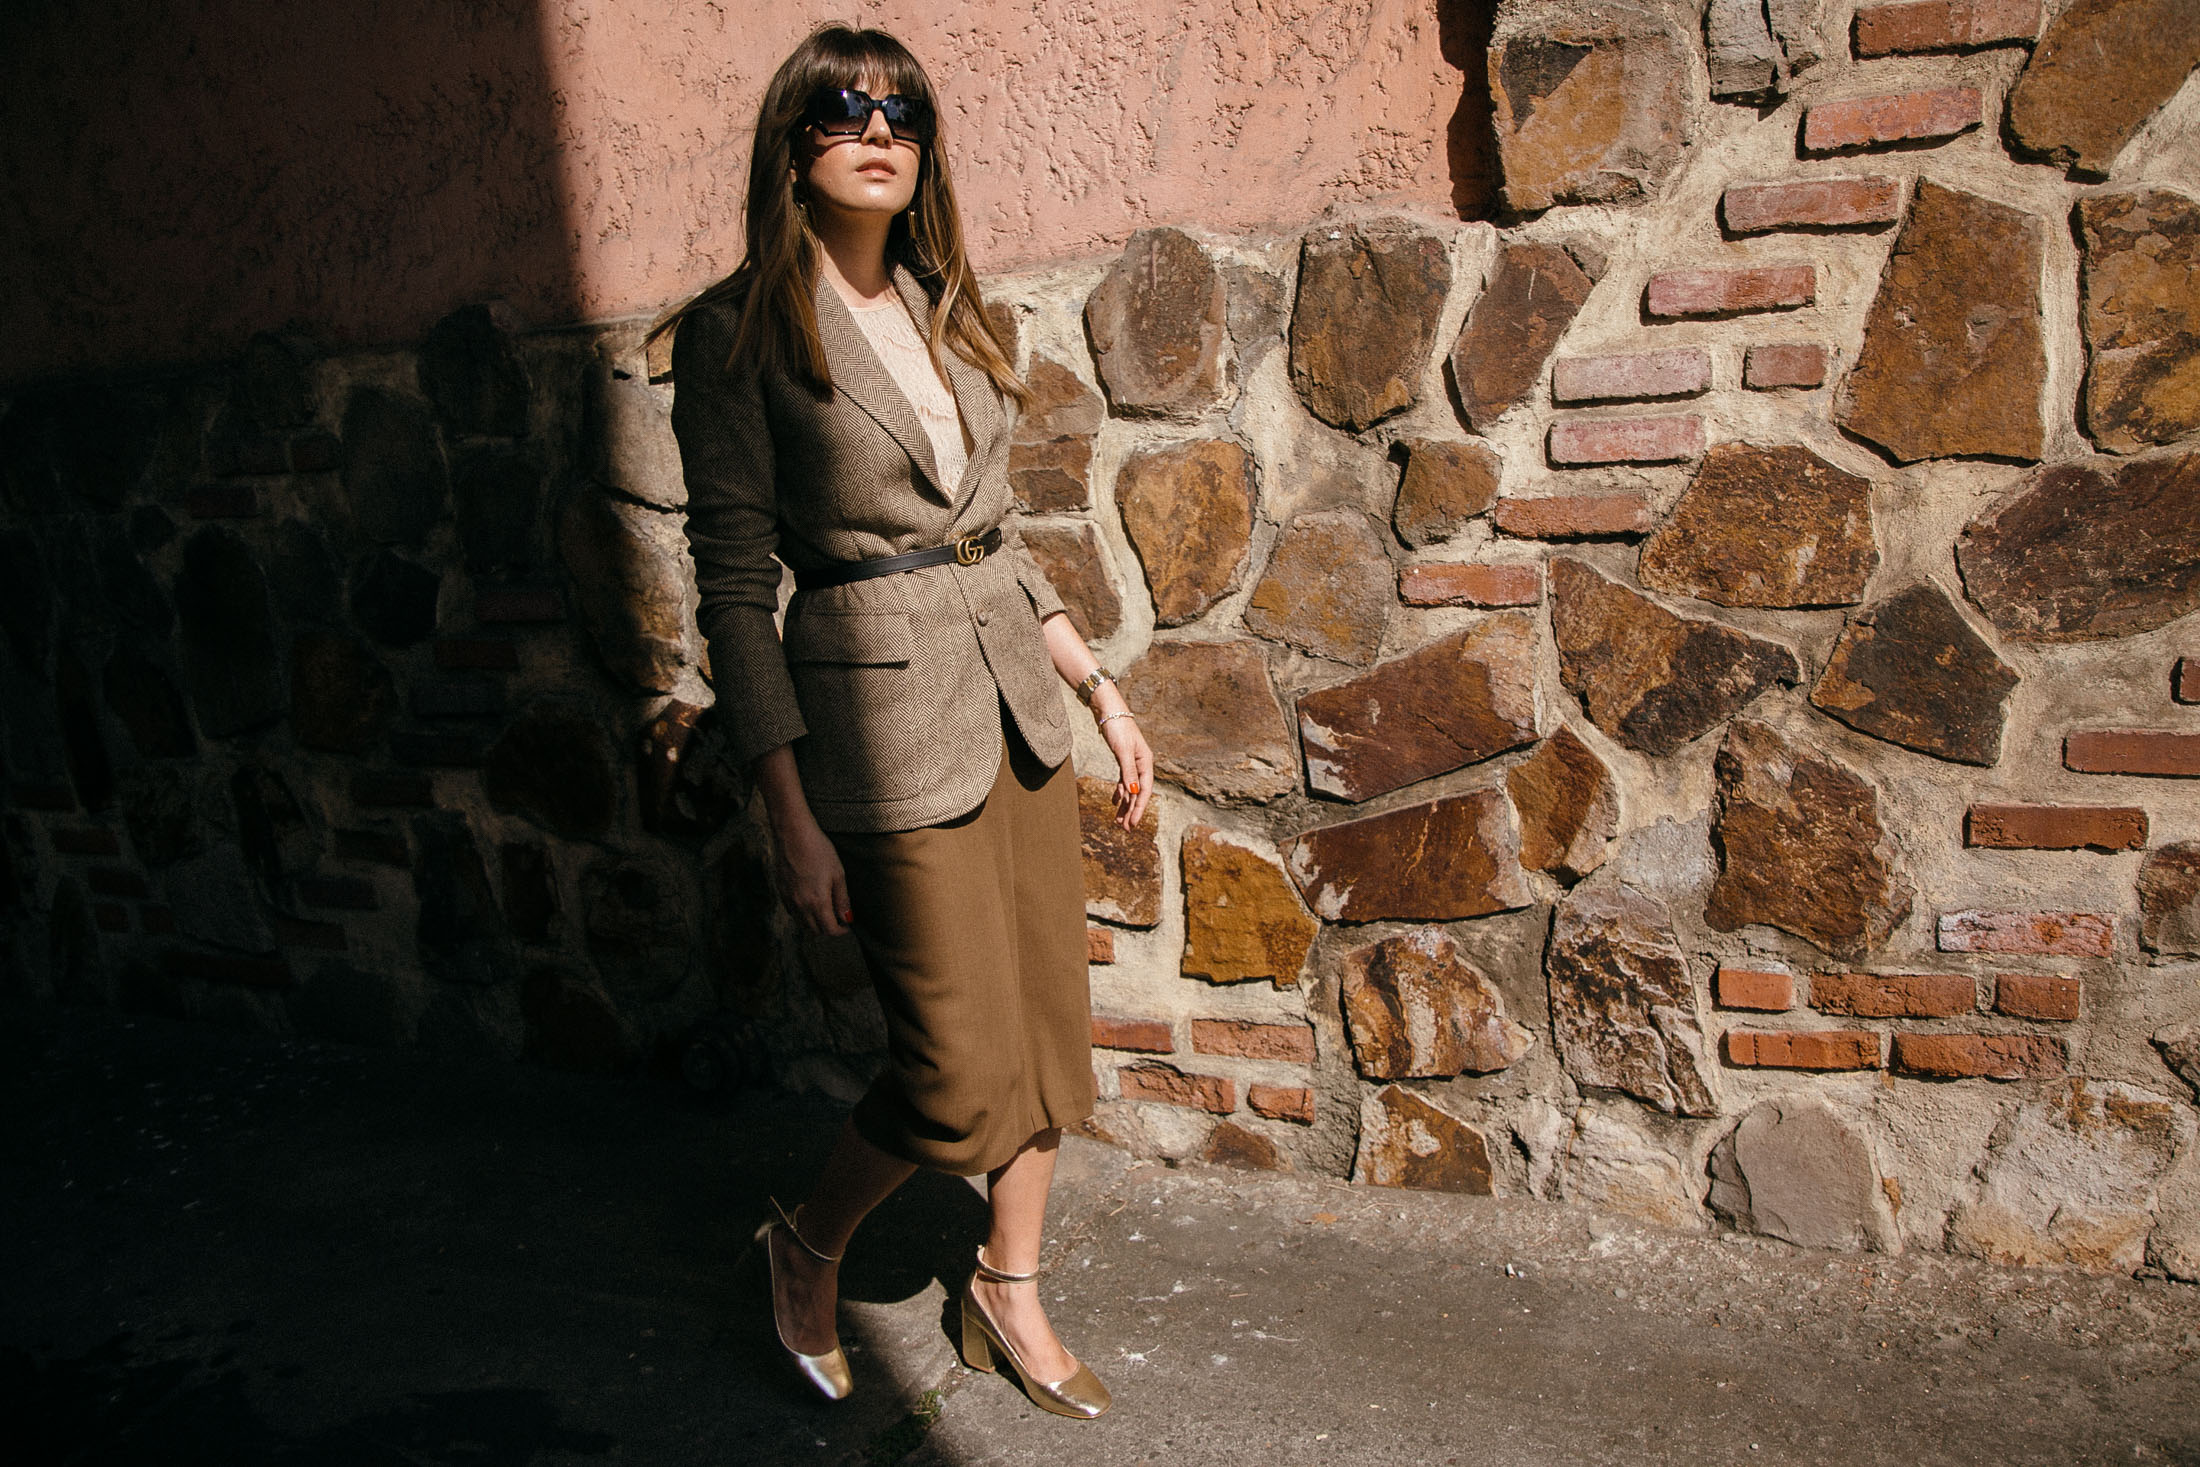 Maristella wears a belted blazer, pencil skirt, gold pumps and Chanel sunglasses